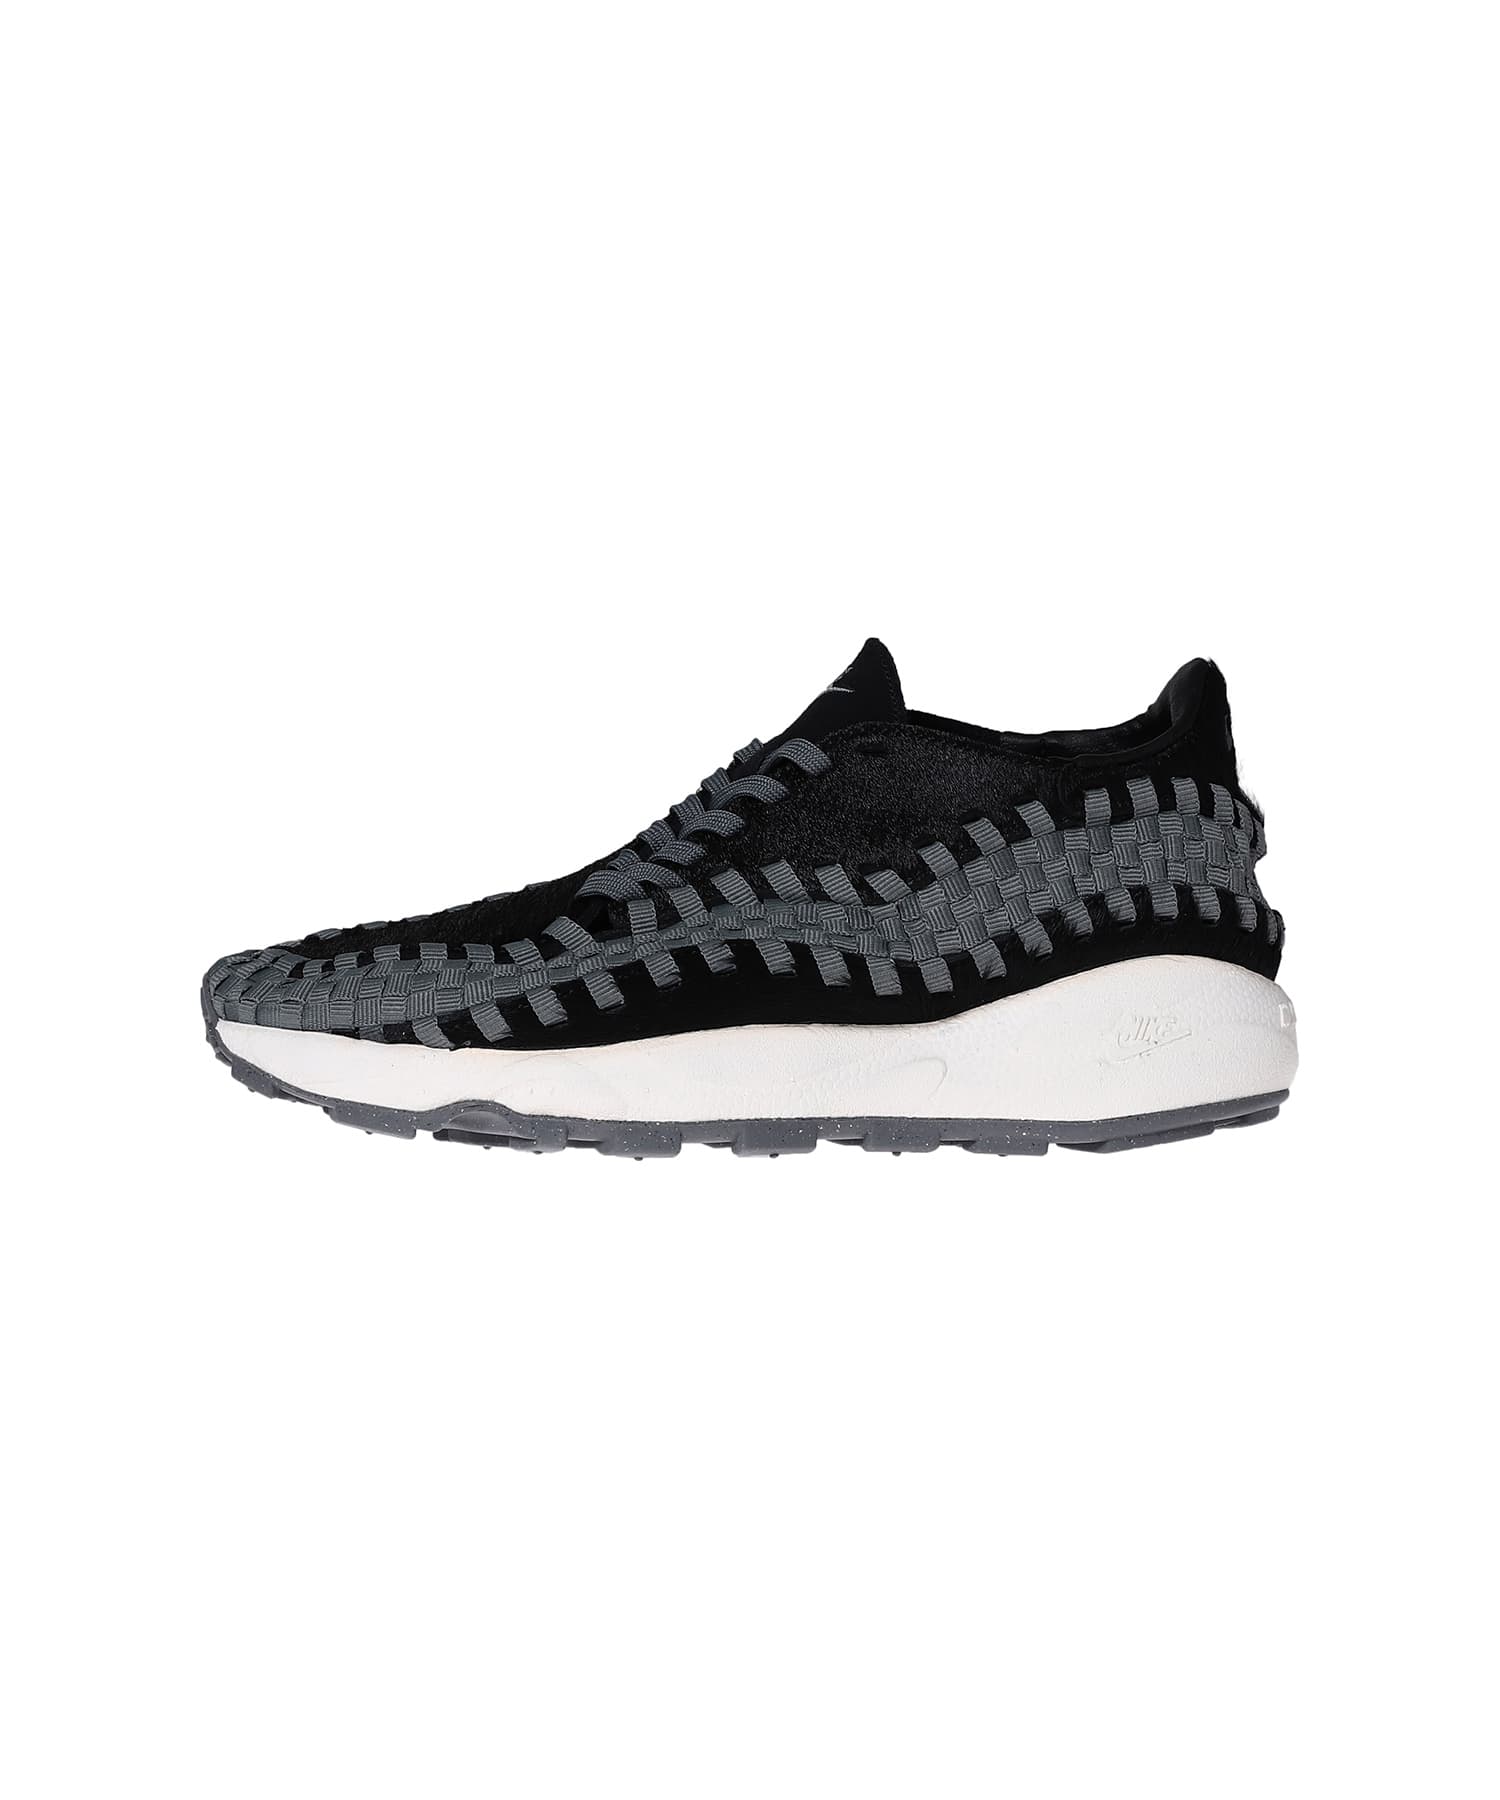 Nike Wmns Air Footscape Woven